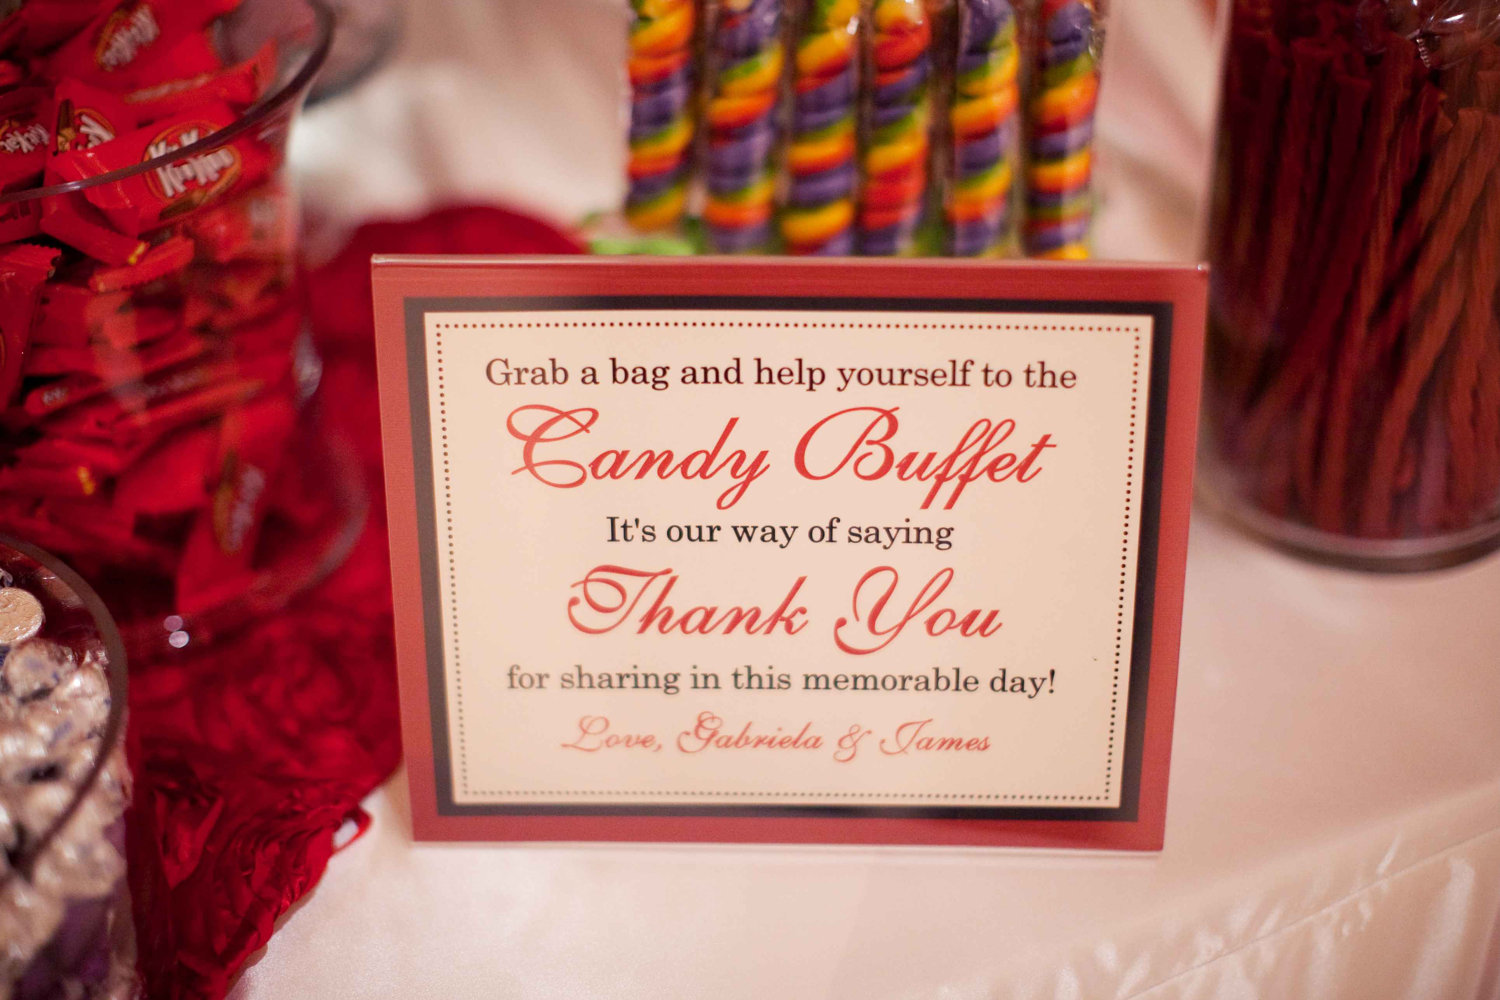 Candy Buffet Signs For Weddings